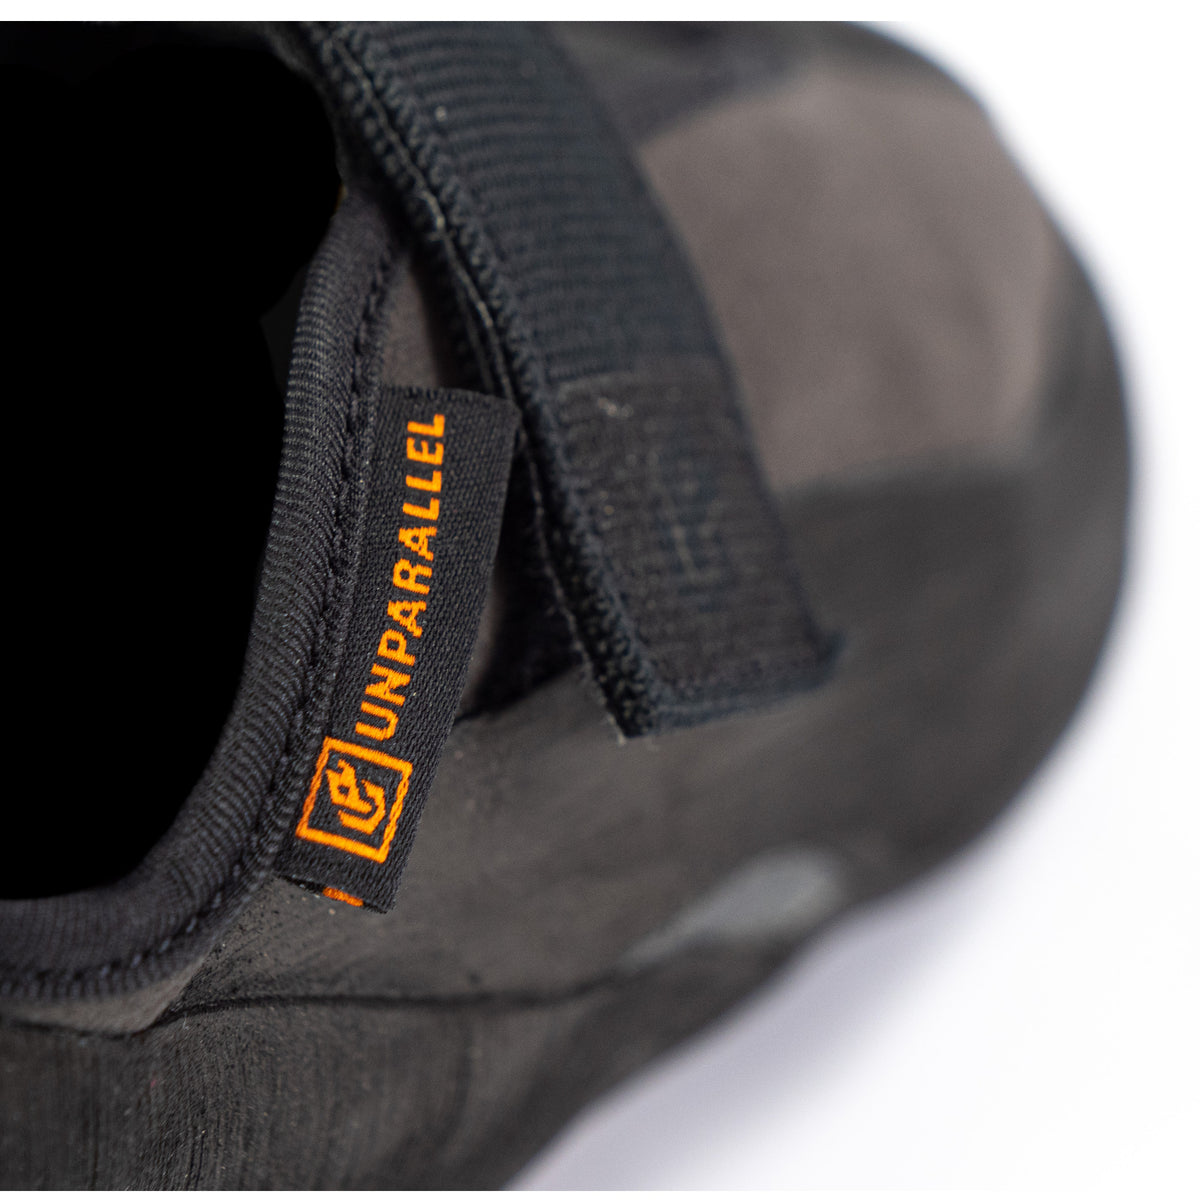 Unparallel logo in orange on a black tab with rest of shoe blurred out in background